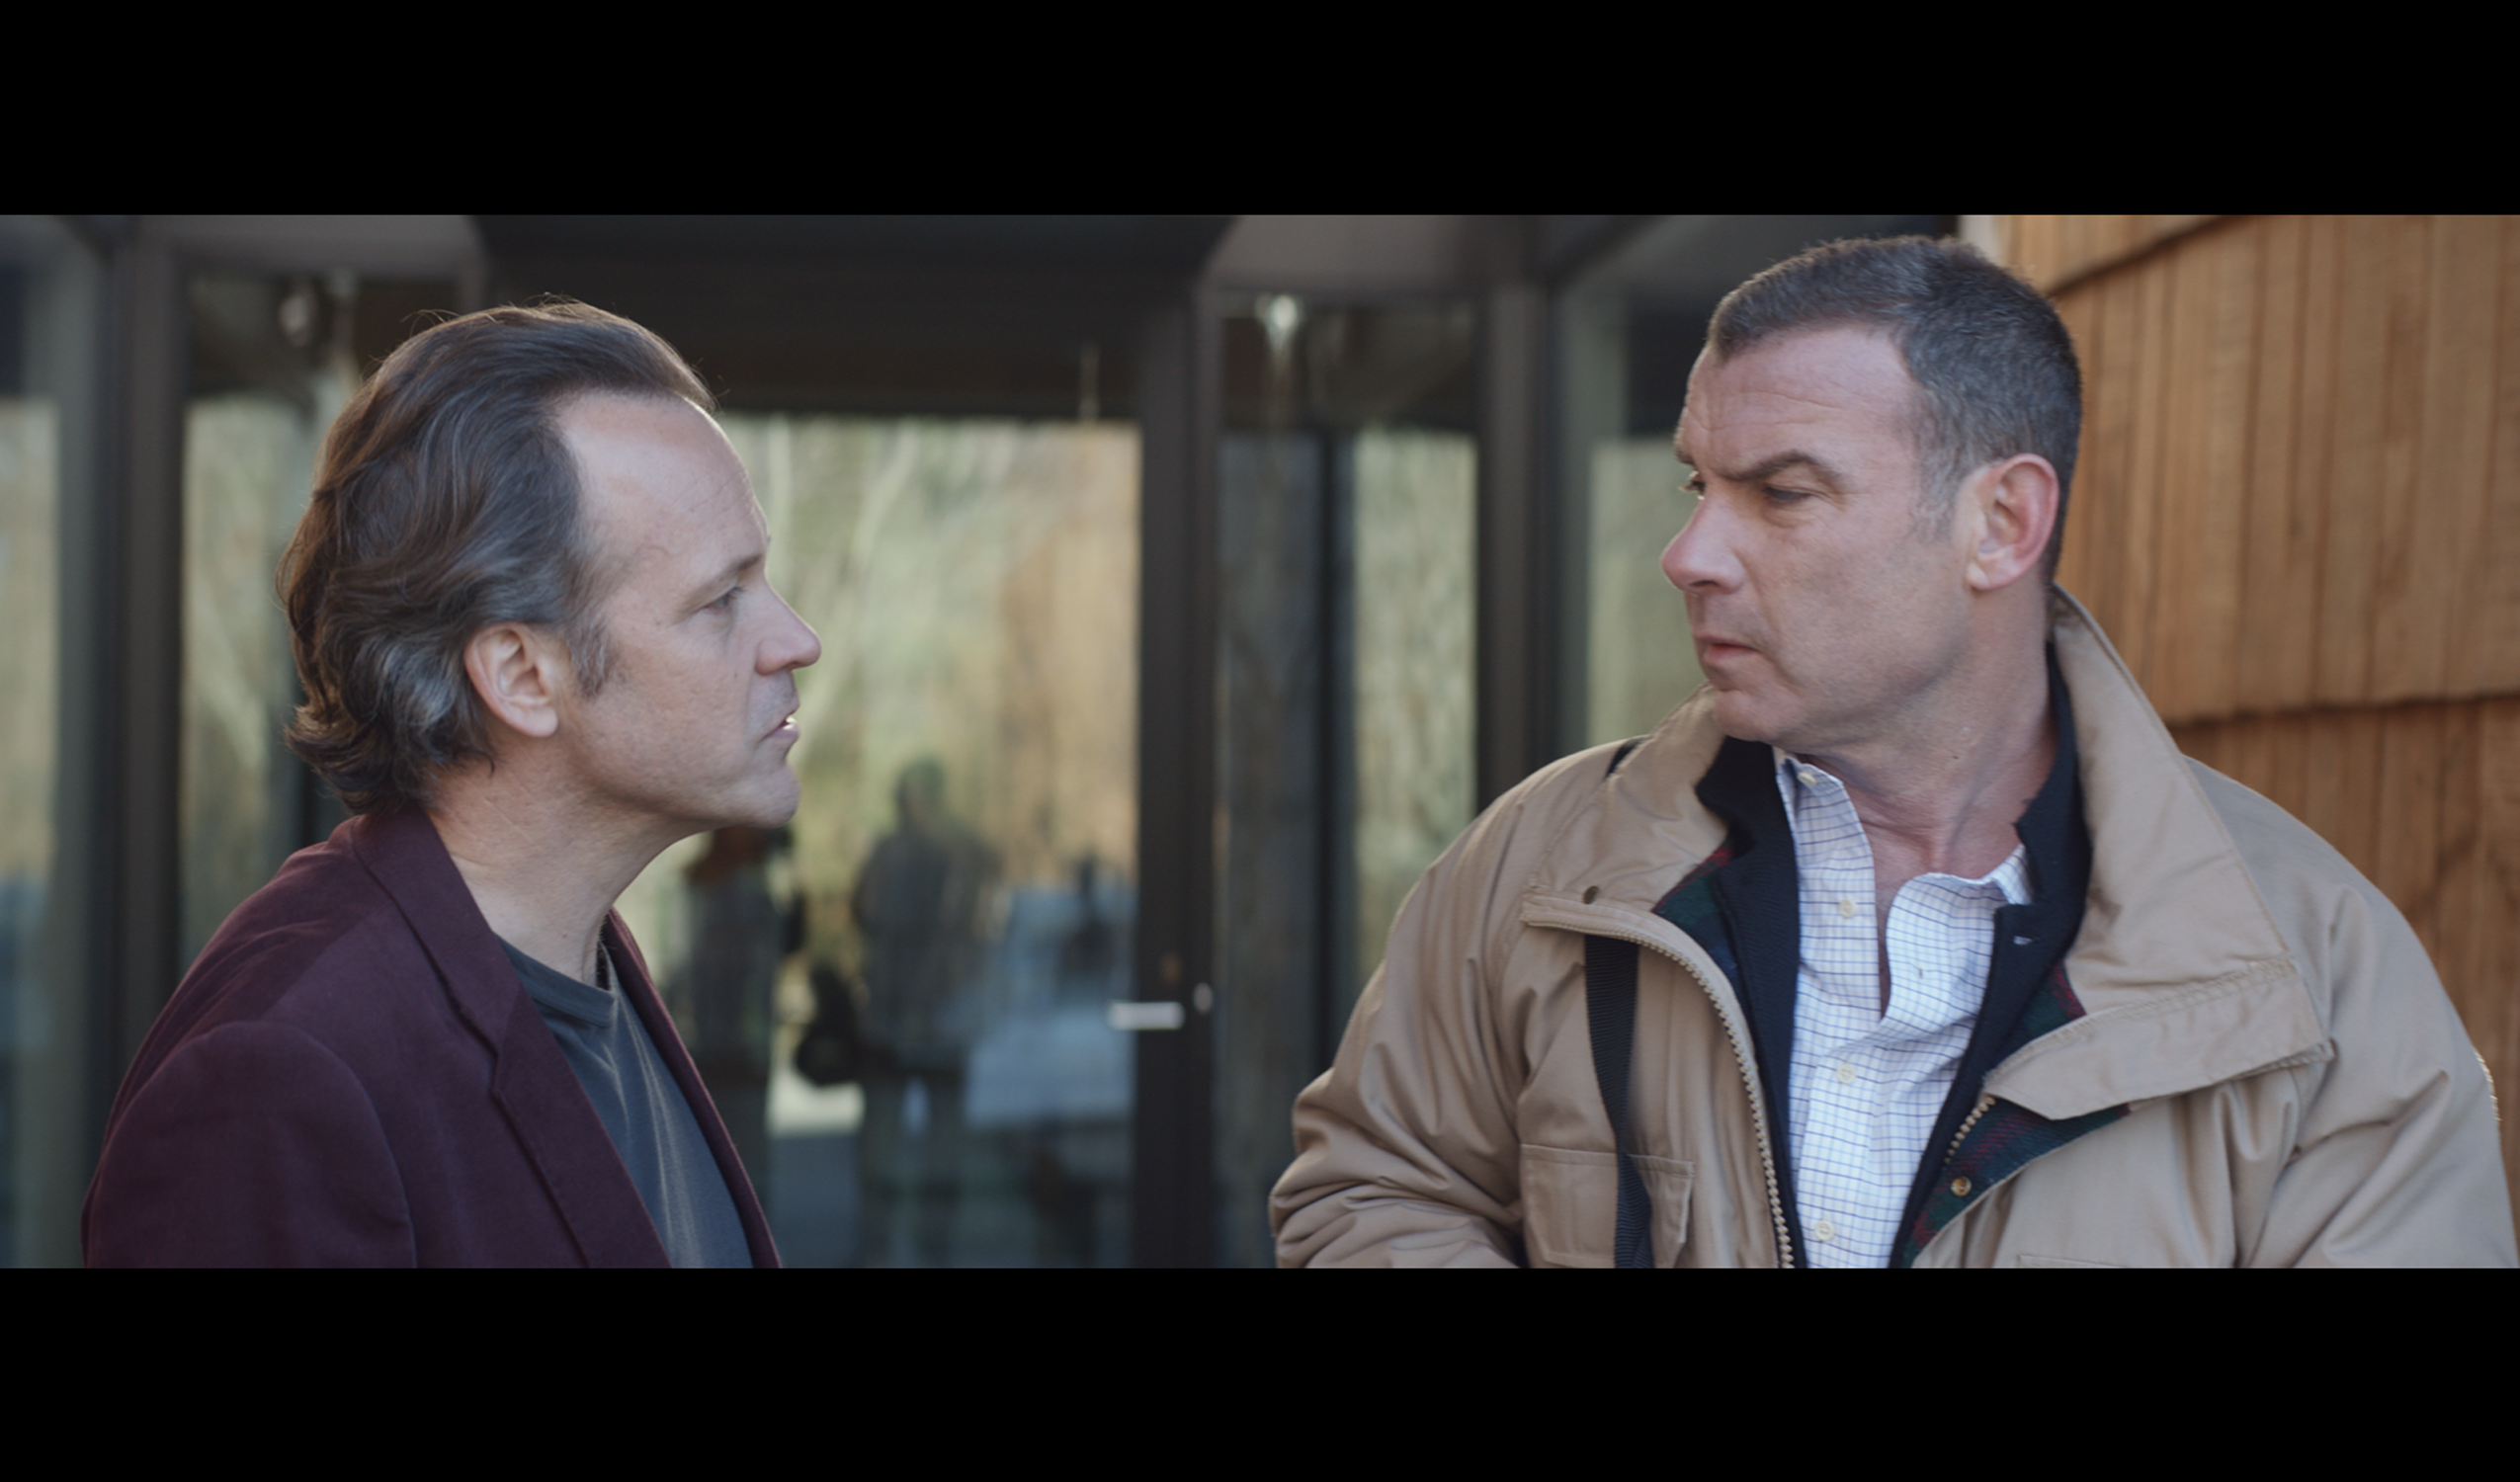 A still from the film, where two middle-aged white men face each other in front of a glass wall. One is frowning slightly and they look as if they are in the middle of a conversation.